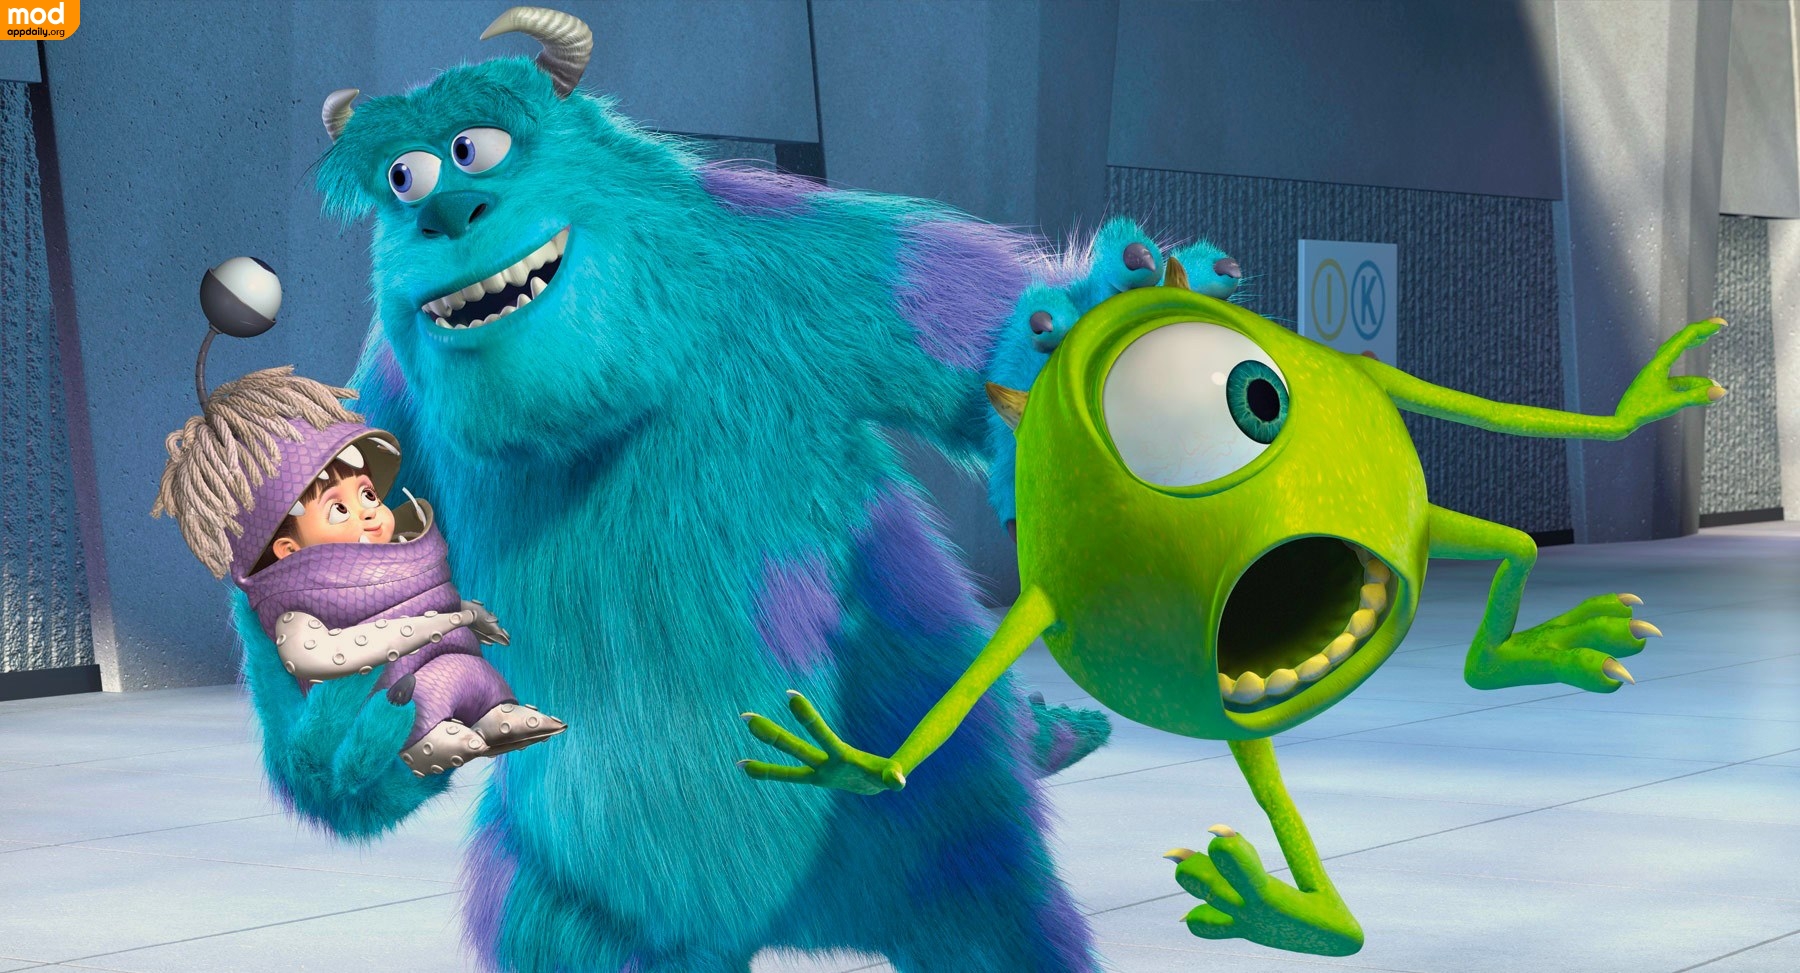 Sullivan - Blue Monster from Monsters Inc intentionally riles up Mike, starting a Scare Spat